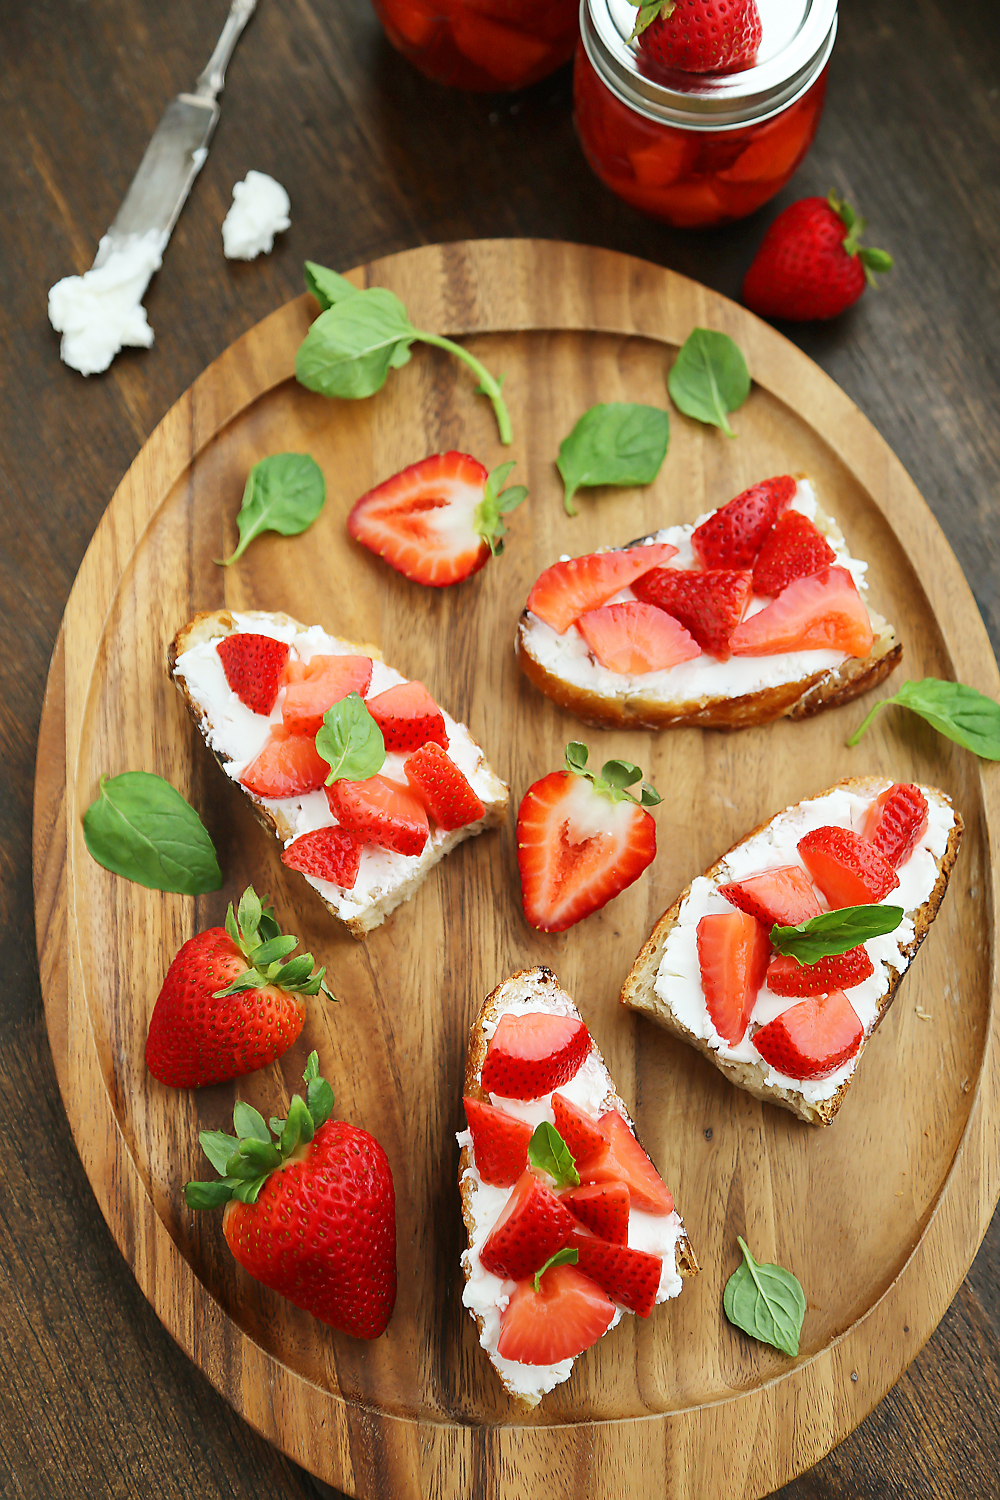 Vanilla Bean Pickled Strawberries with Goat Cheese Crostini - Sweet, tangy vanilla-scented pickled strawberries pair perfectly with goat cheese crostini! So simple, elegant and easy for parties. Thecomfortofcooking.com